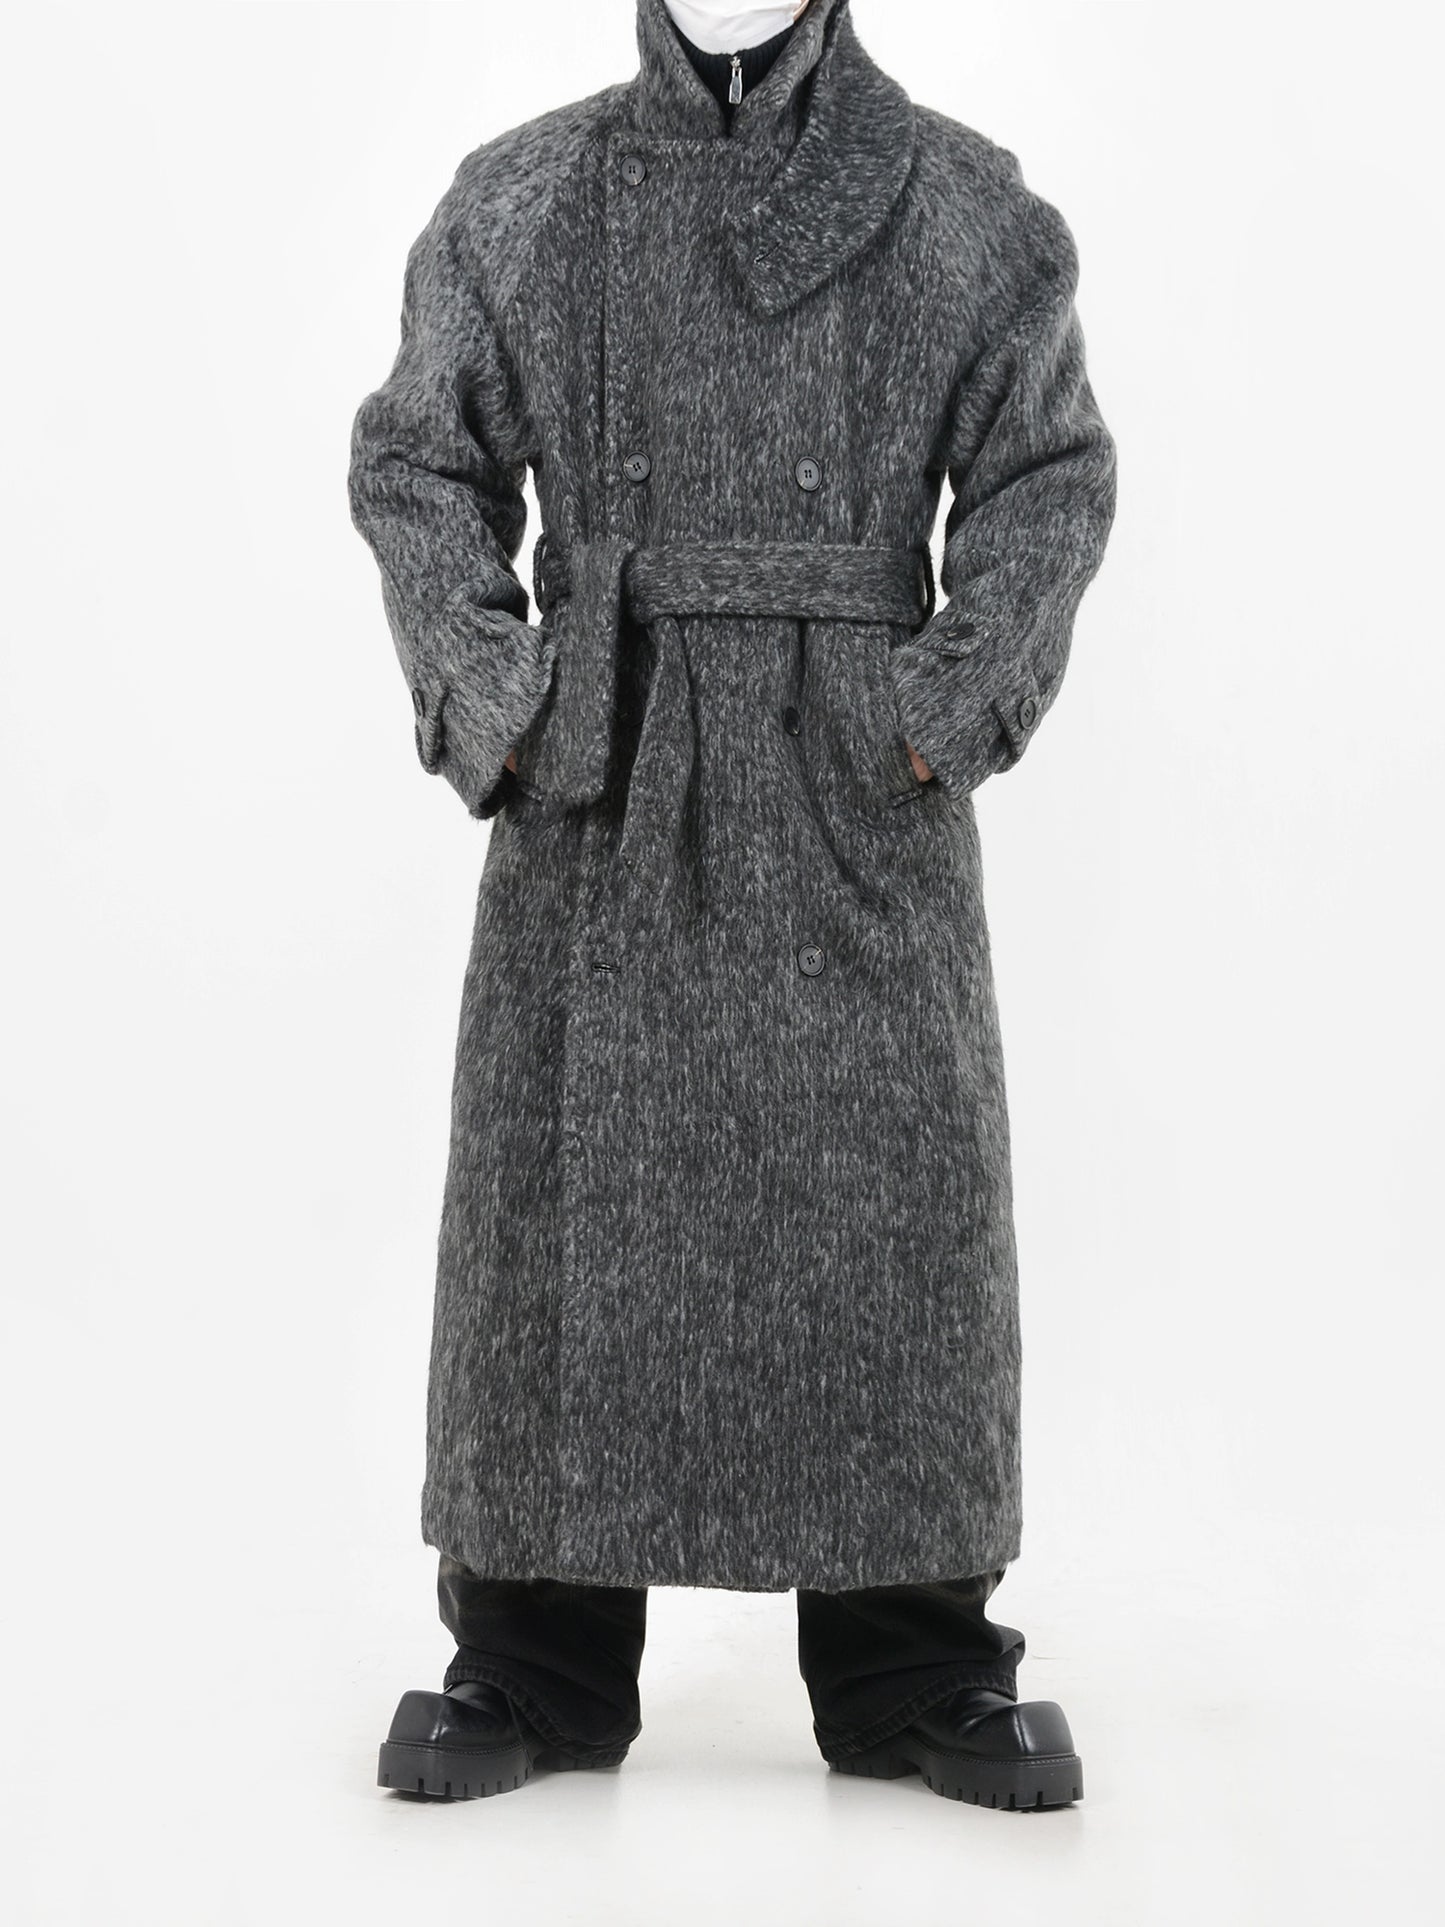 LUCE GARMENT is a deconstructed woolen coat jacket men's thickened strappy design over-the-knee trench coat